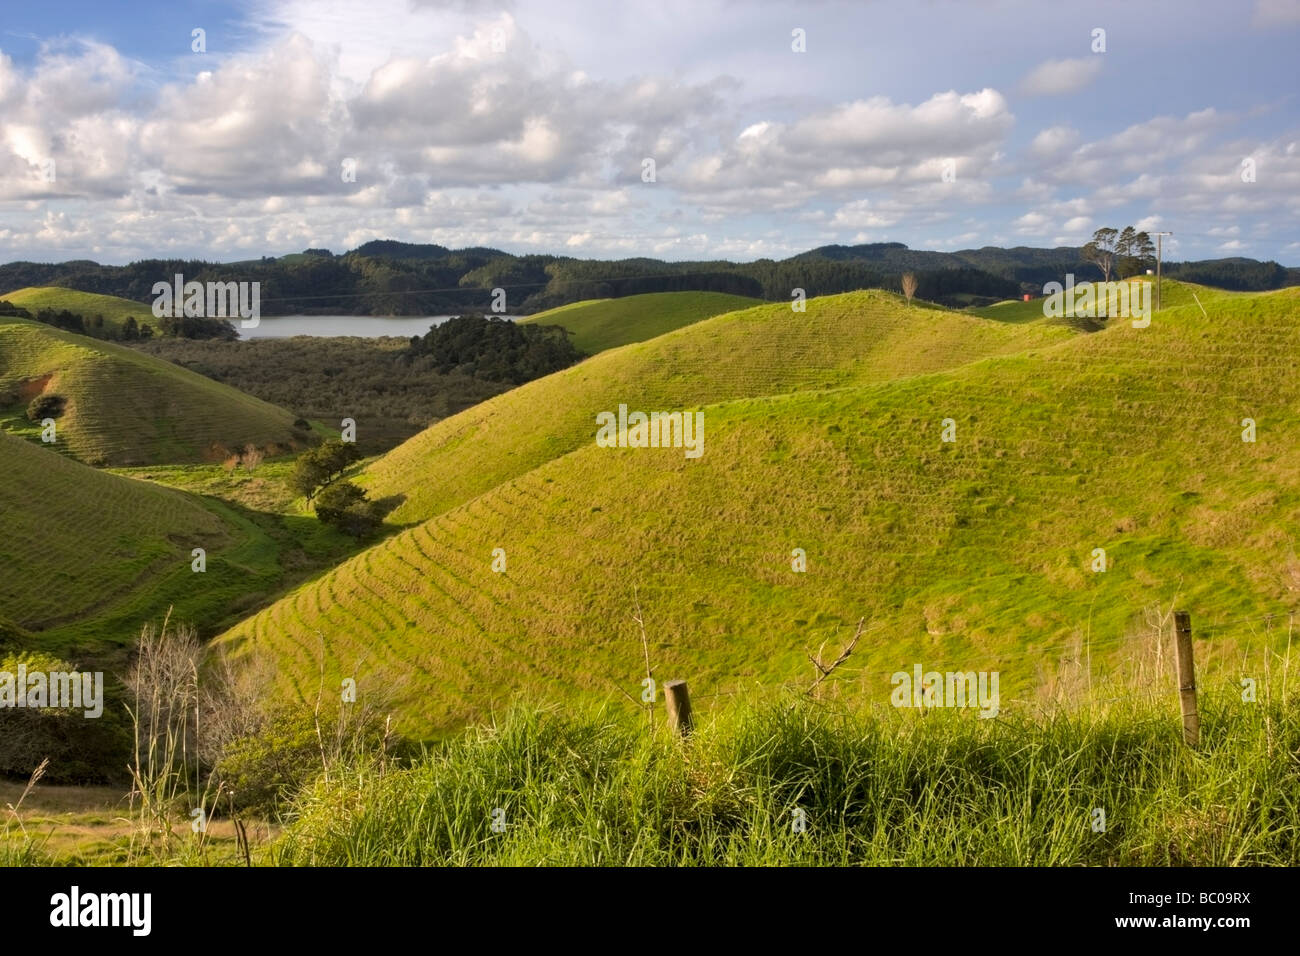 Farmland, Bay of Islands, Northland, New Zealand. The ridges on the hillsides are erosion caused by grazing sheep and cattle. Stock Photo